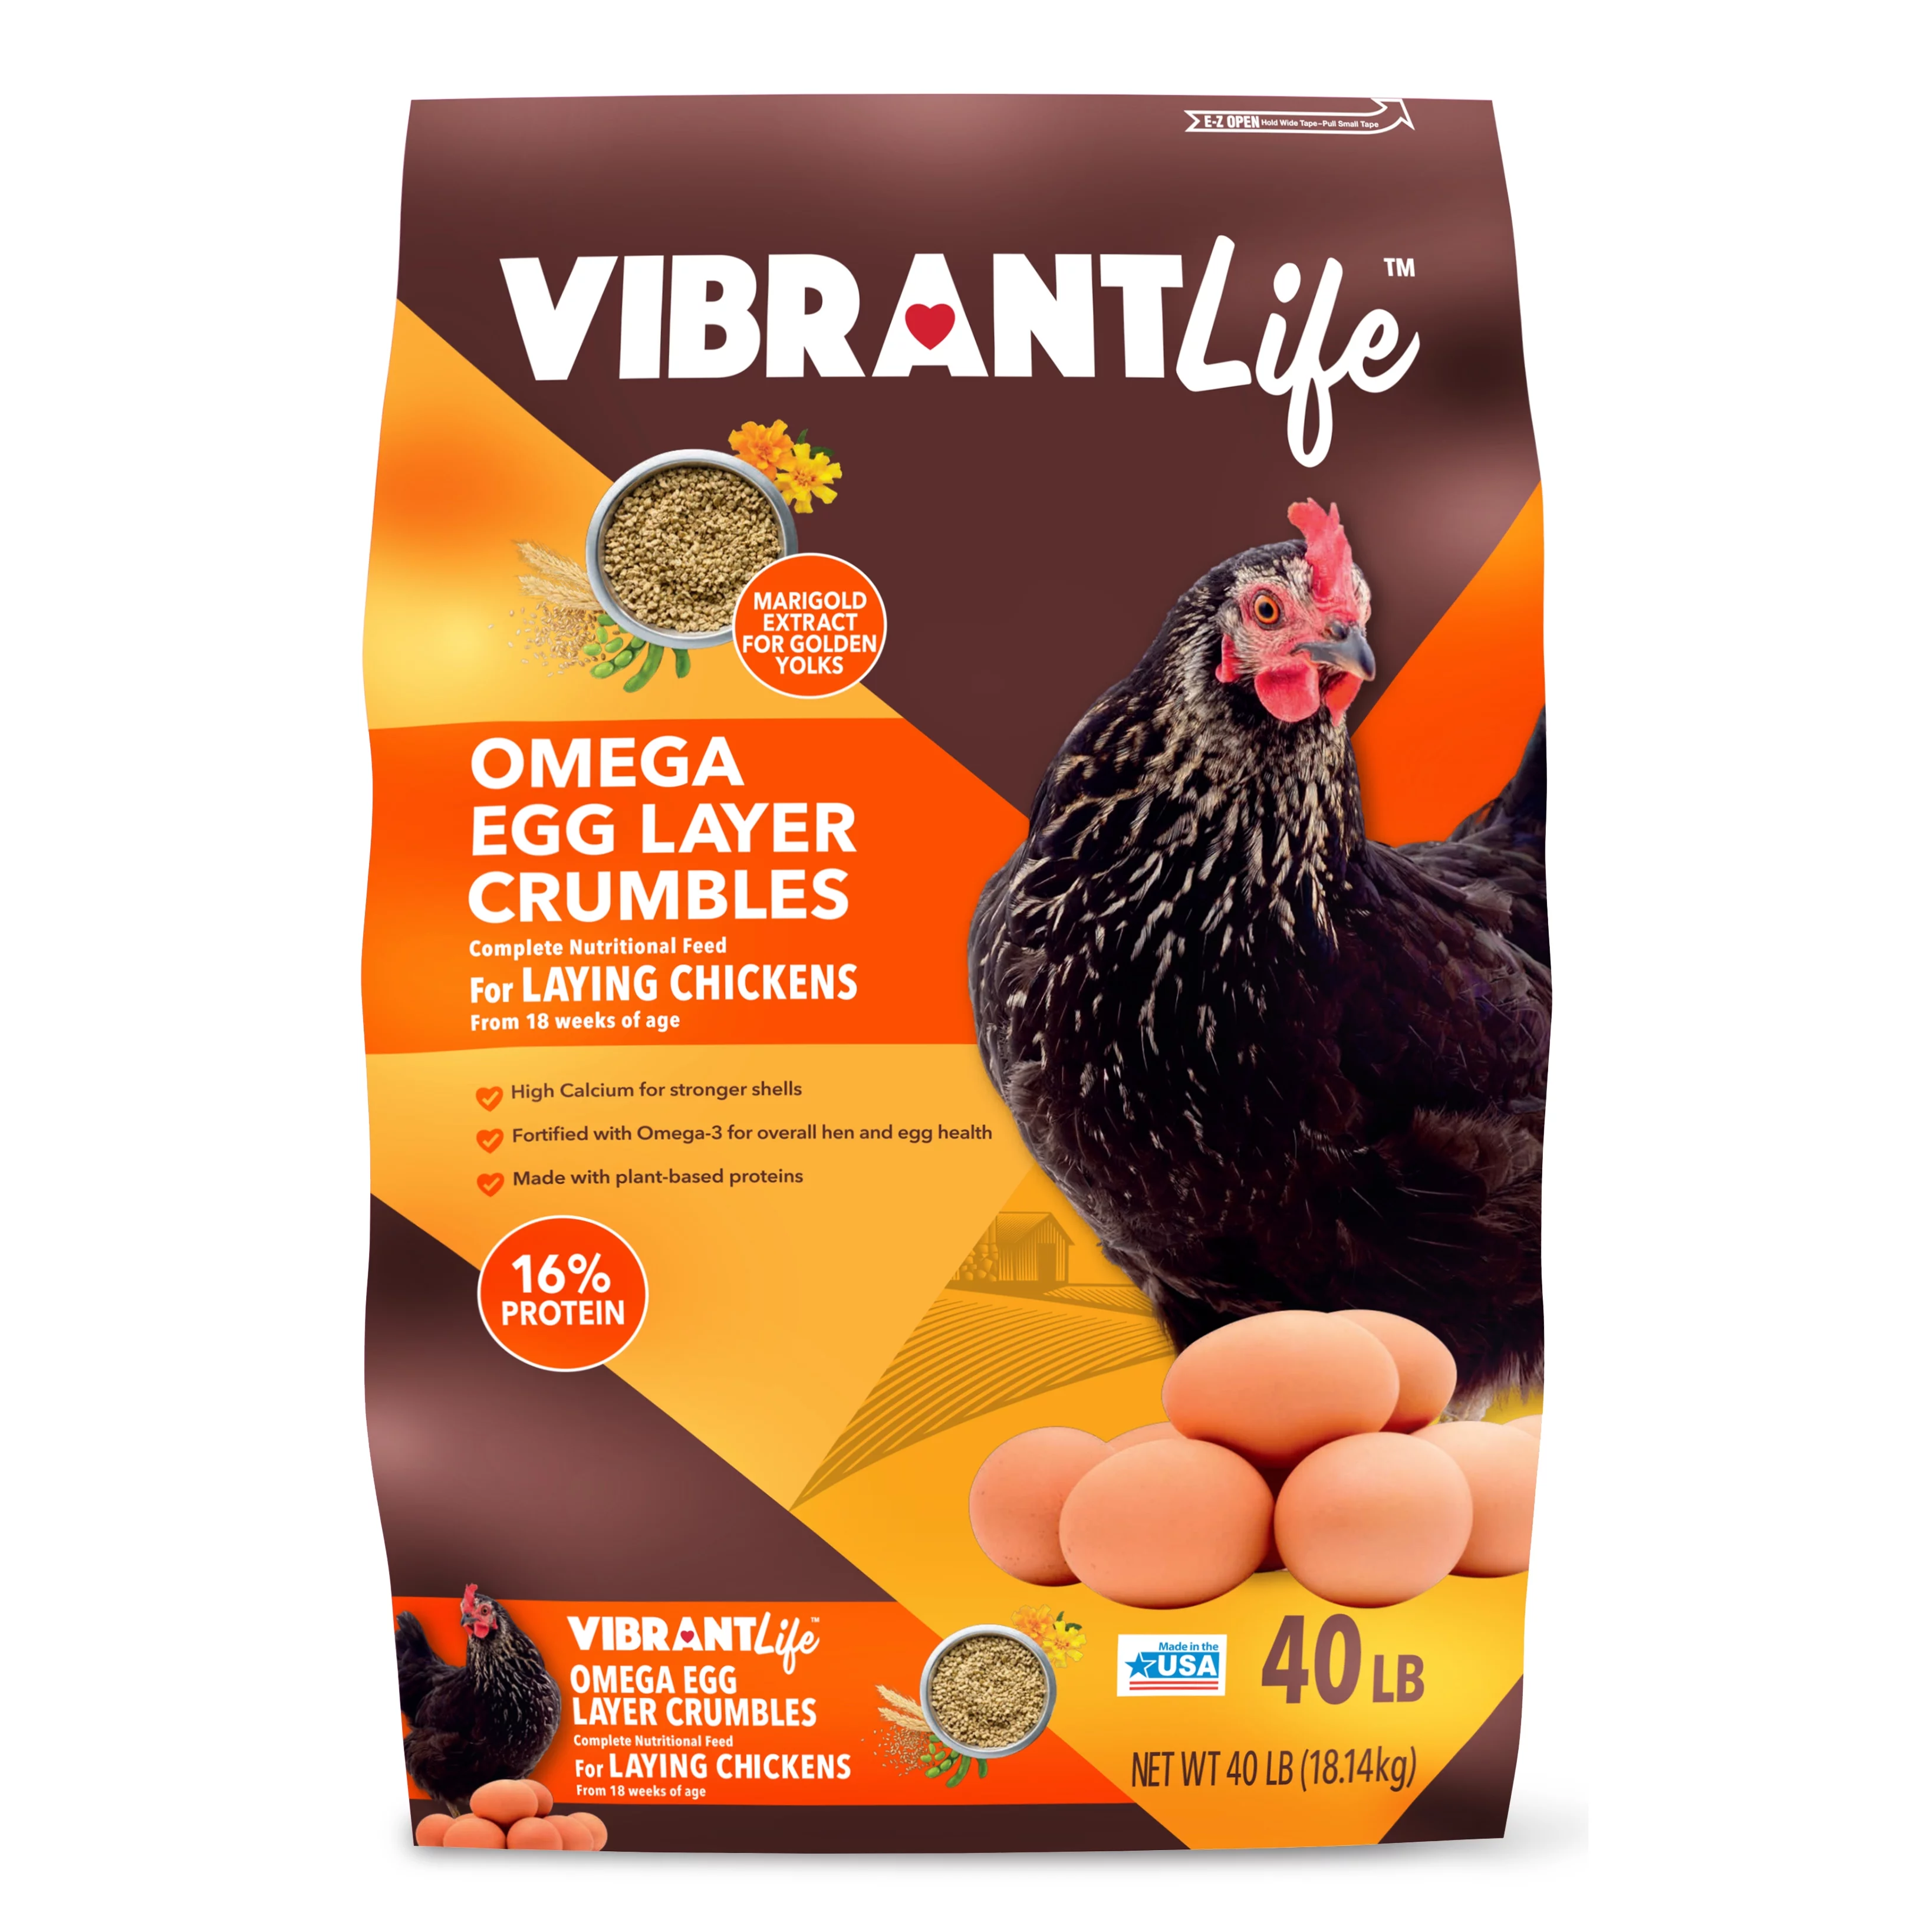 Vibrant Life Omega Egg Layer Crumbles Complete Nutritional Chicken Feed, 40 lb